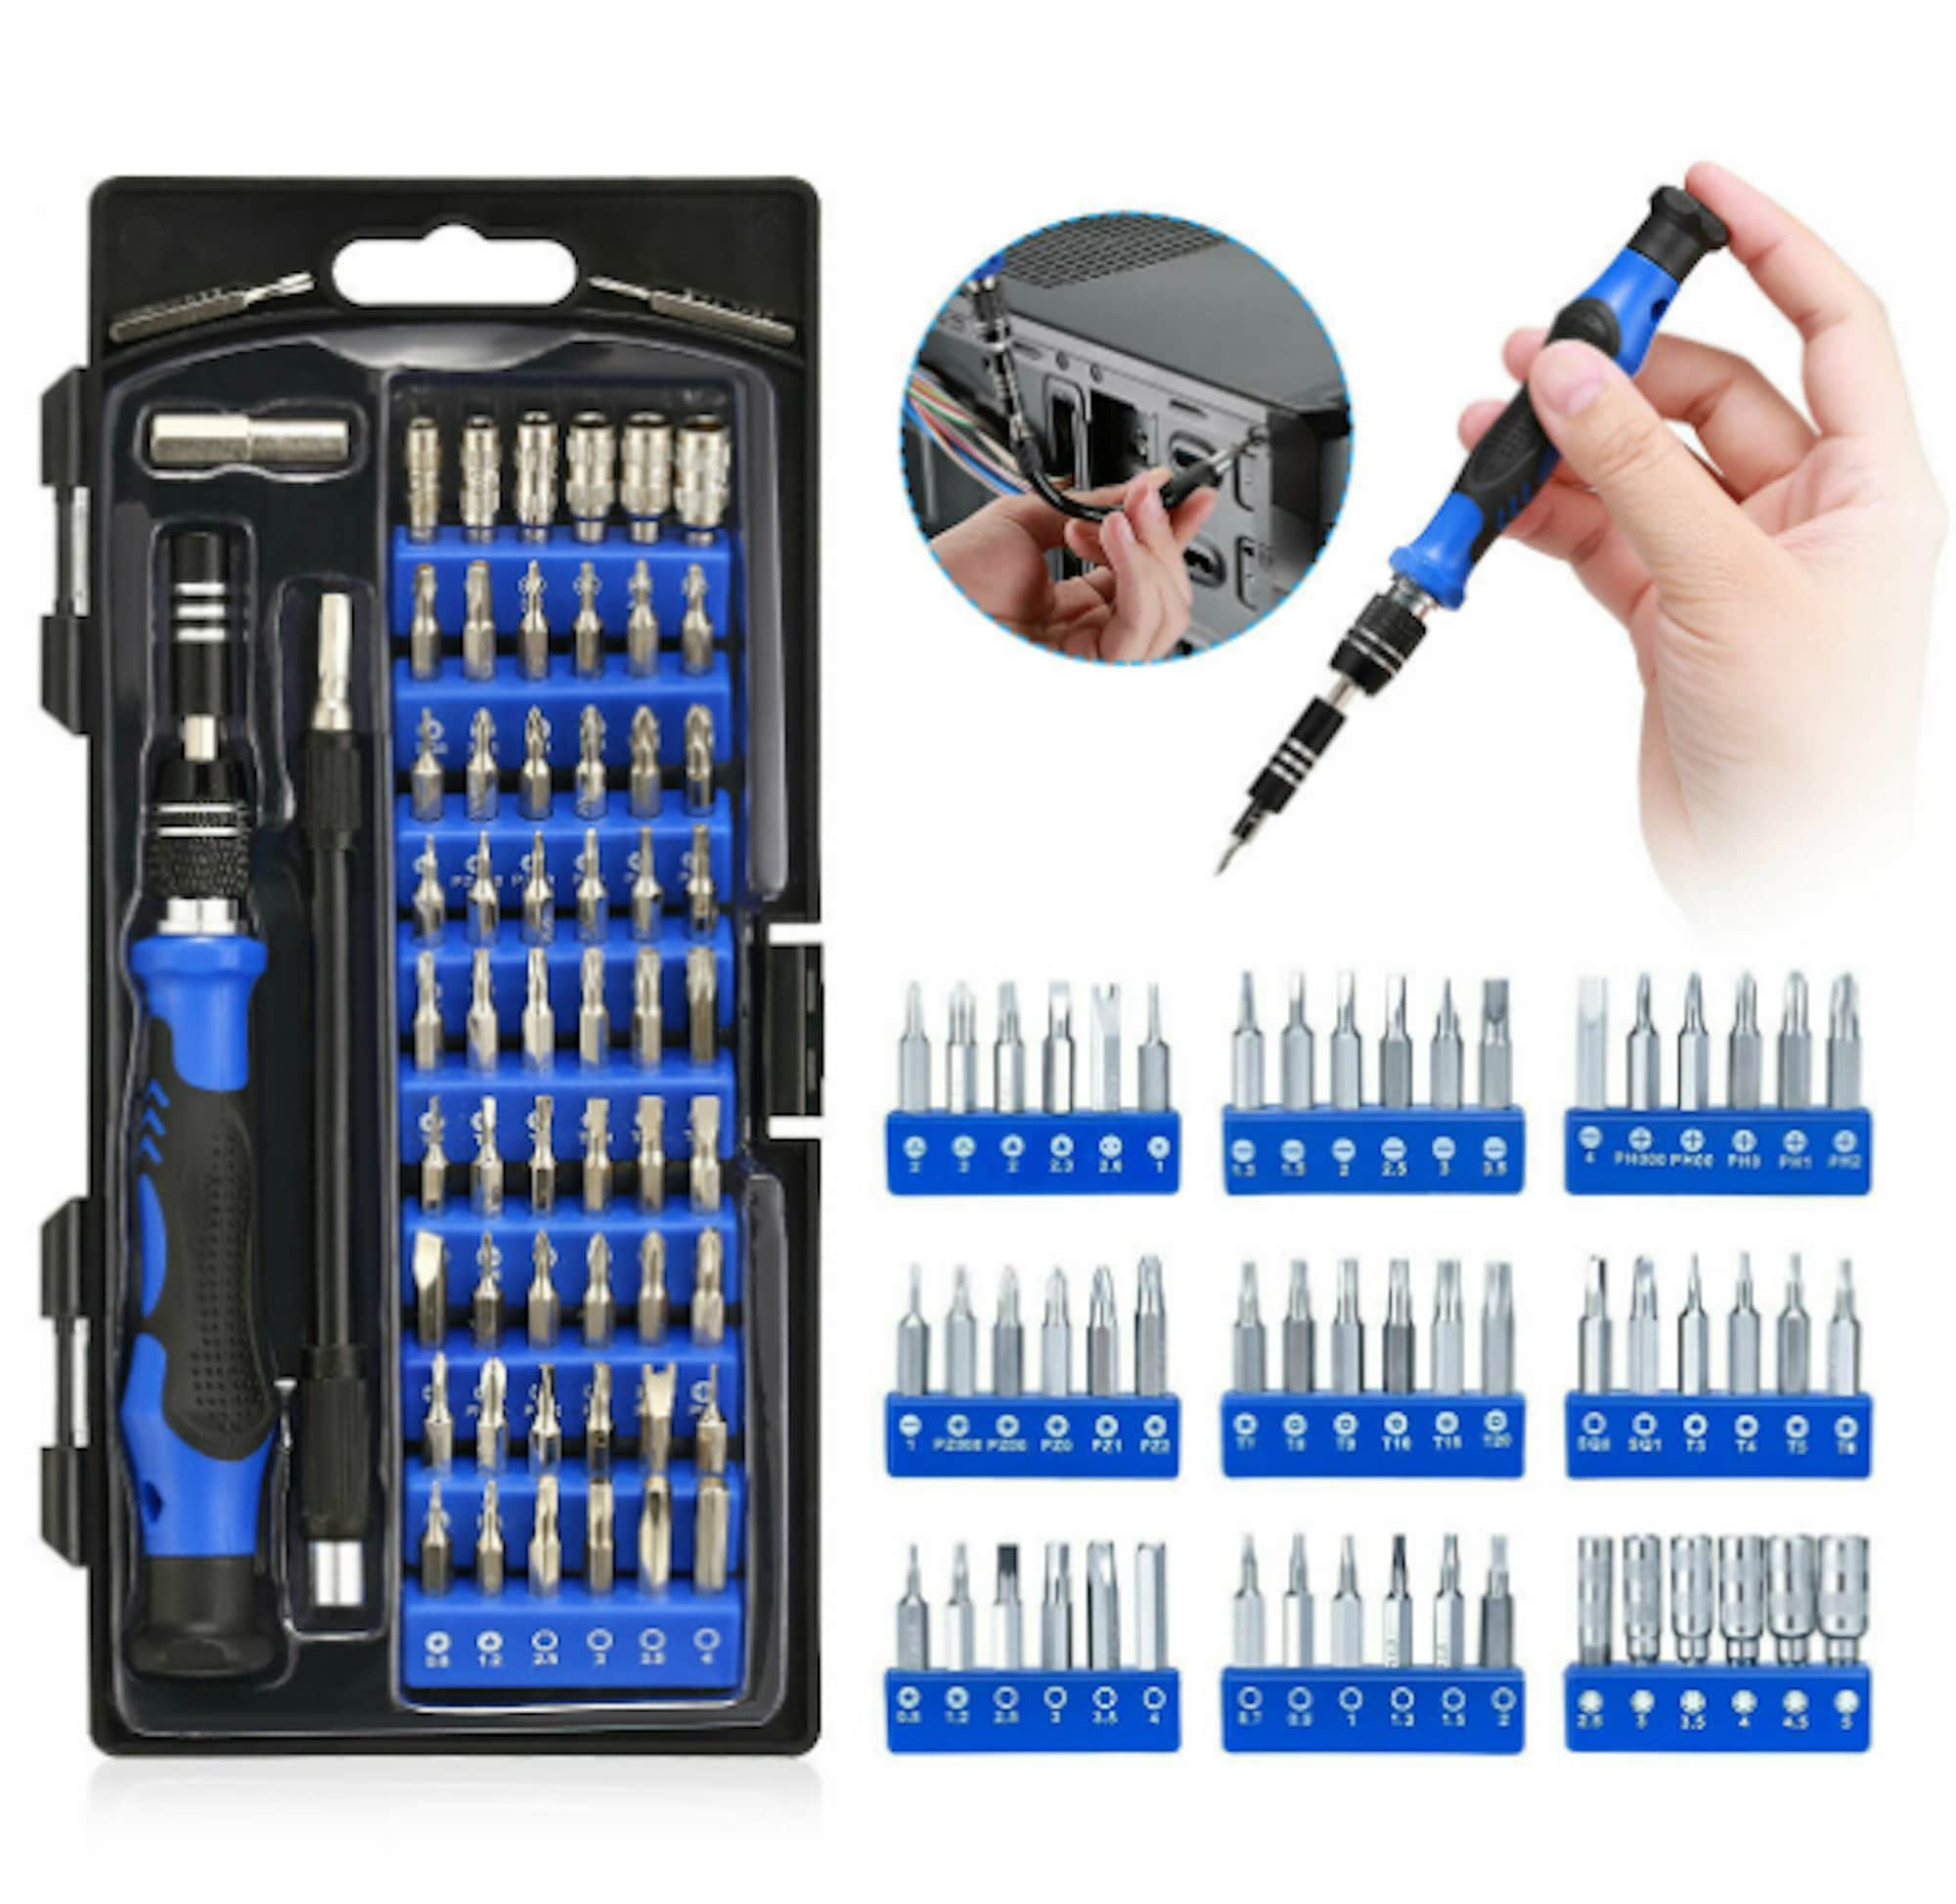 36 Piece Hobby Craft Knife Set Including 12 screwdriver Philips star bits  20 precision blades cleaver hook tweezers hex shank knife head 249